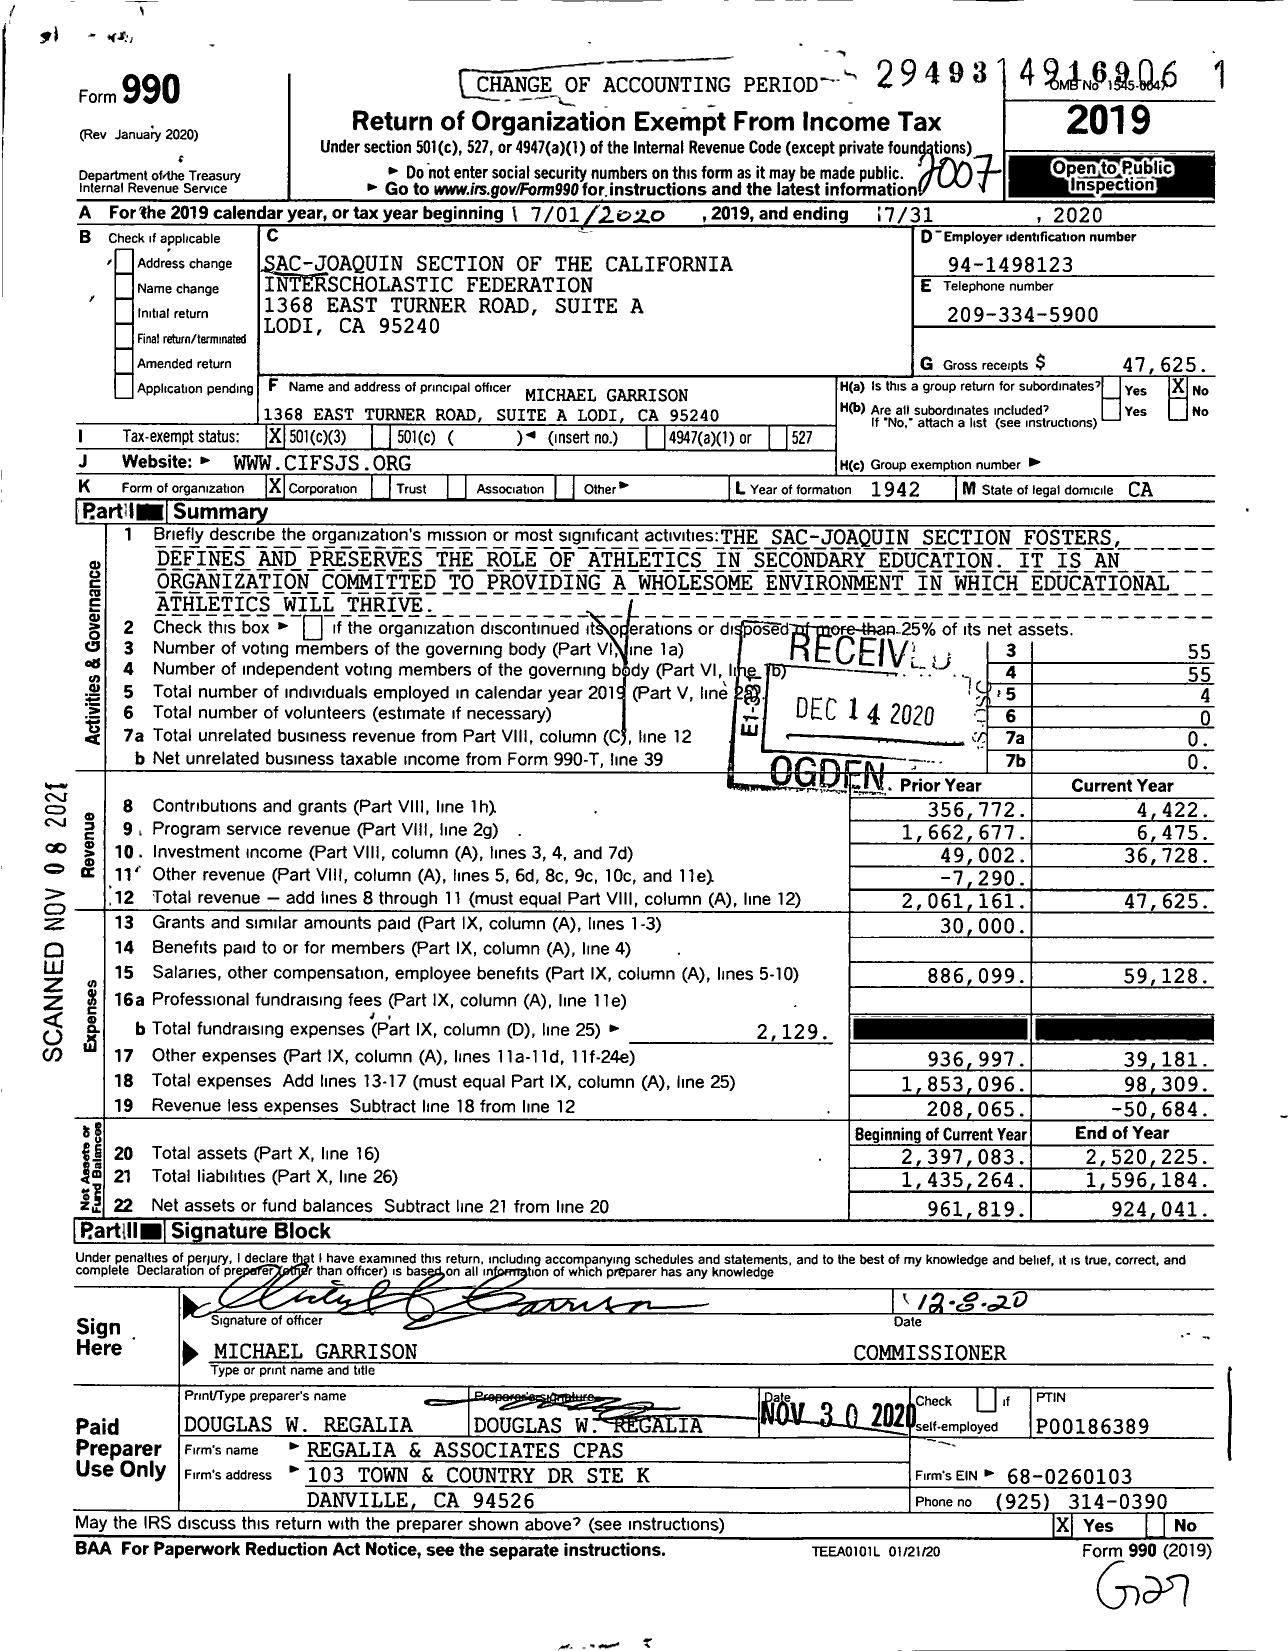 Image of first page of 2019 Form 990 for Sac-Joaquin Section of the California Interscholastic Federation